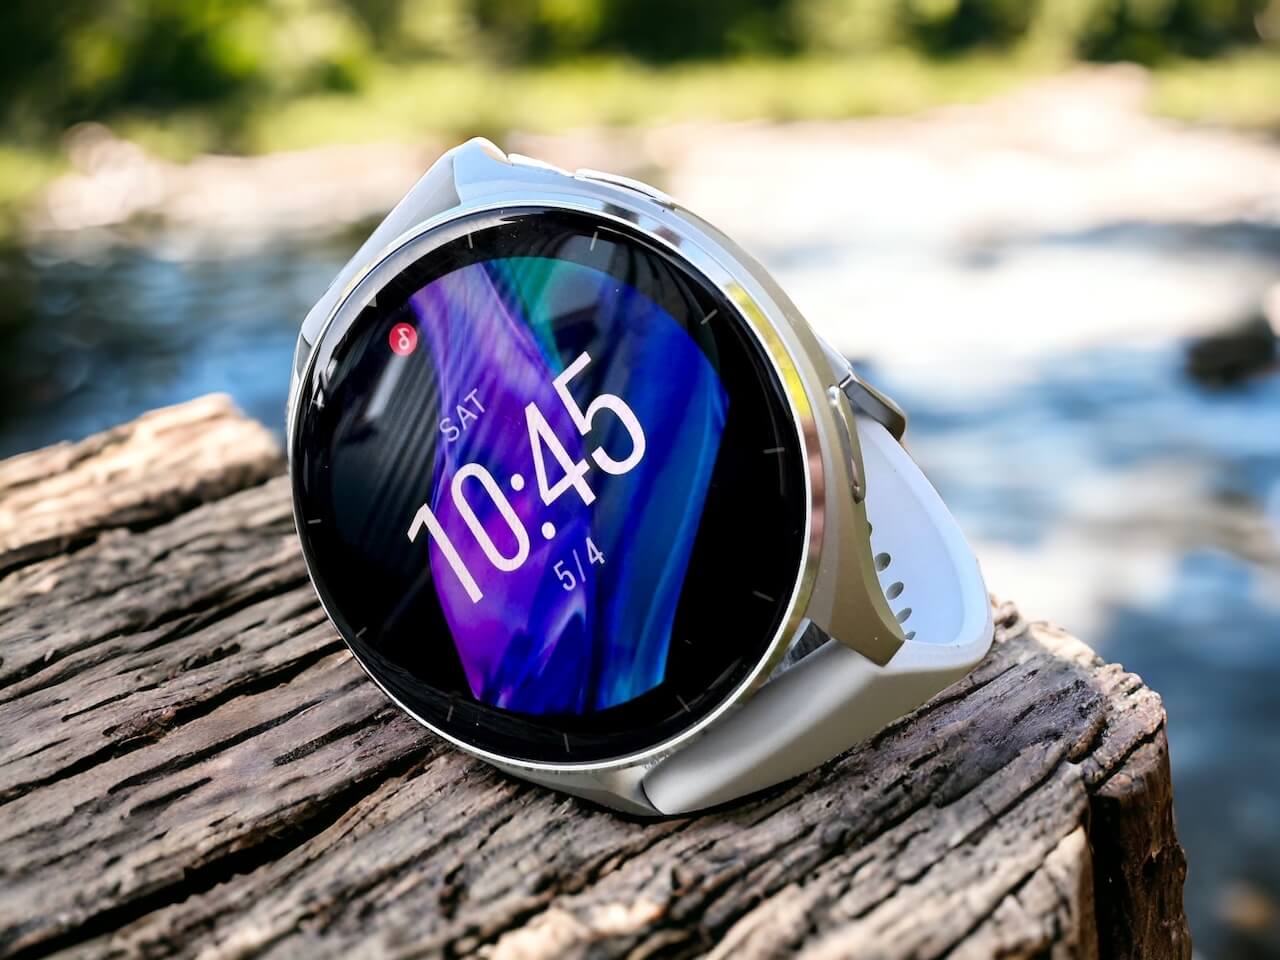 Featured image for “Test: Xiaomi Watch 2”